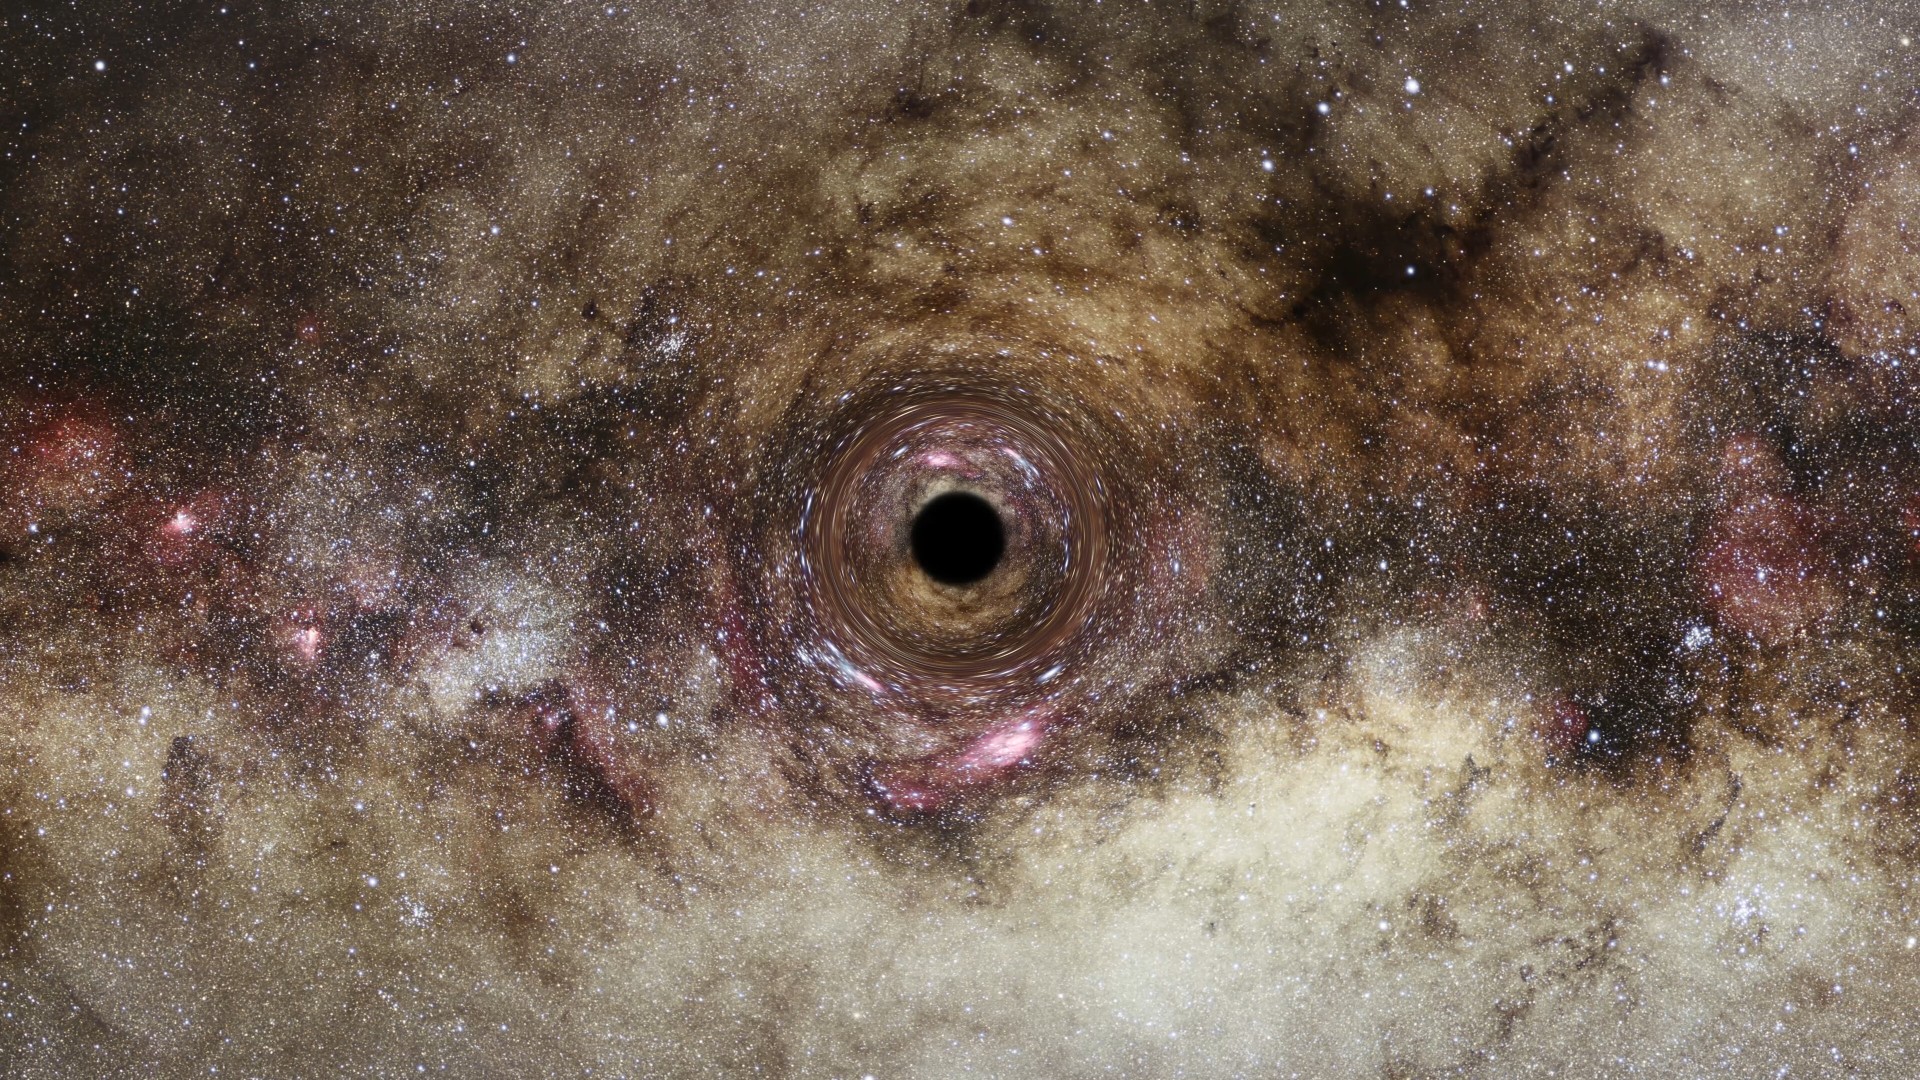 Artist's rendering of a wandering black hole. Int he center there is a black circle and surrounding it the galaxy swirl of stars warp around it.